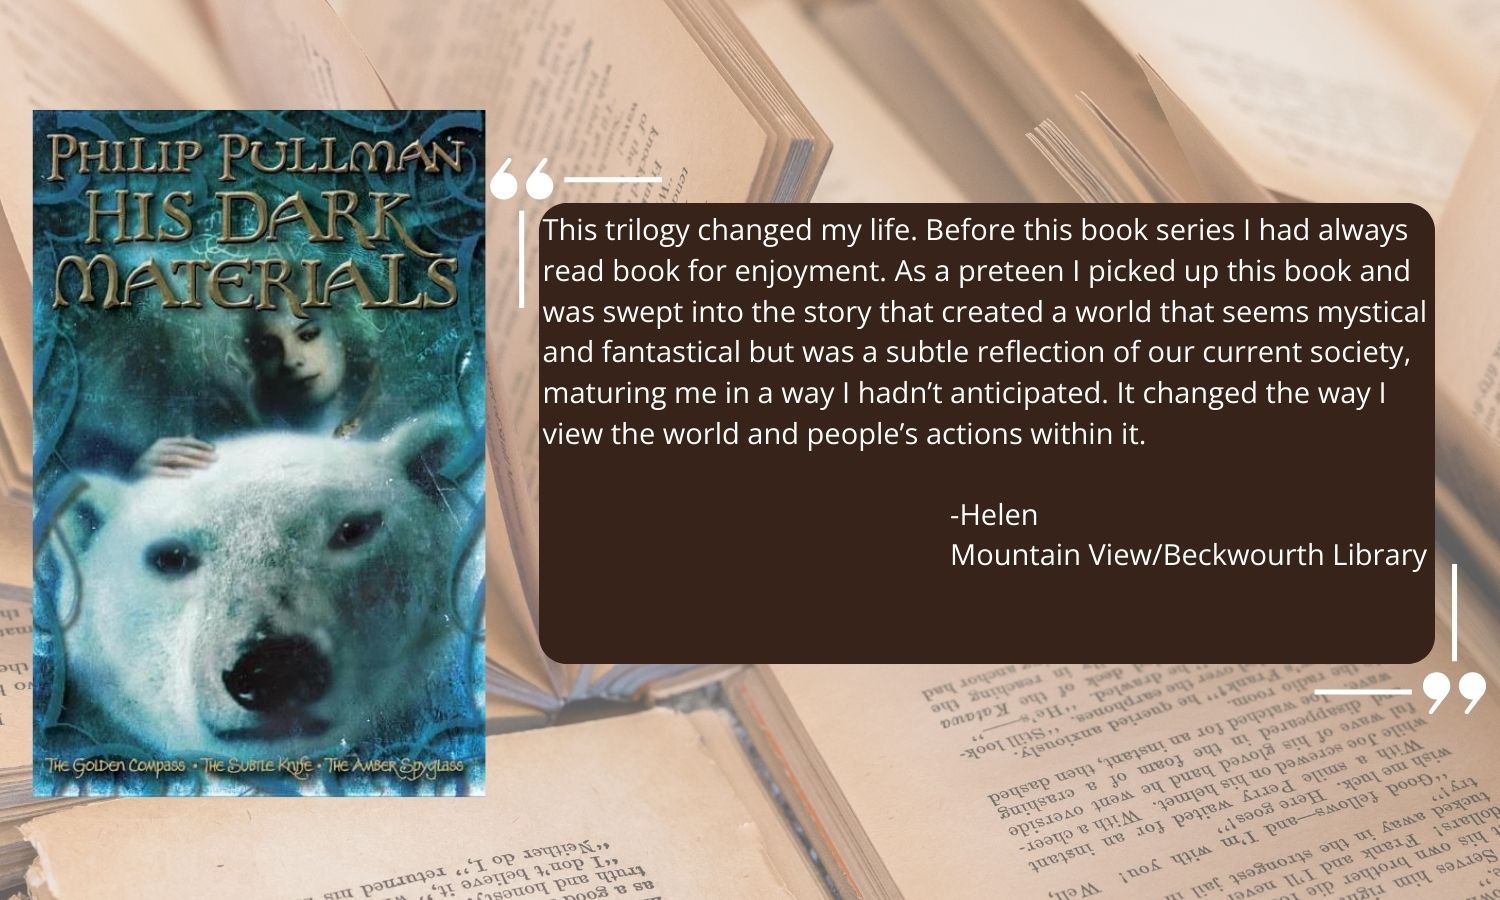 His Dark Materials by Philip Pullman with staff testimonial